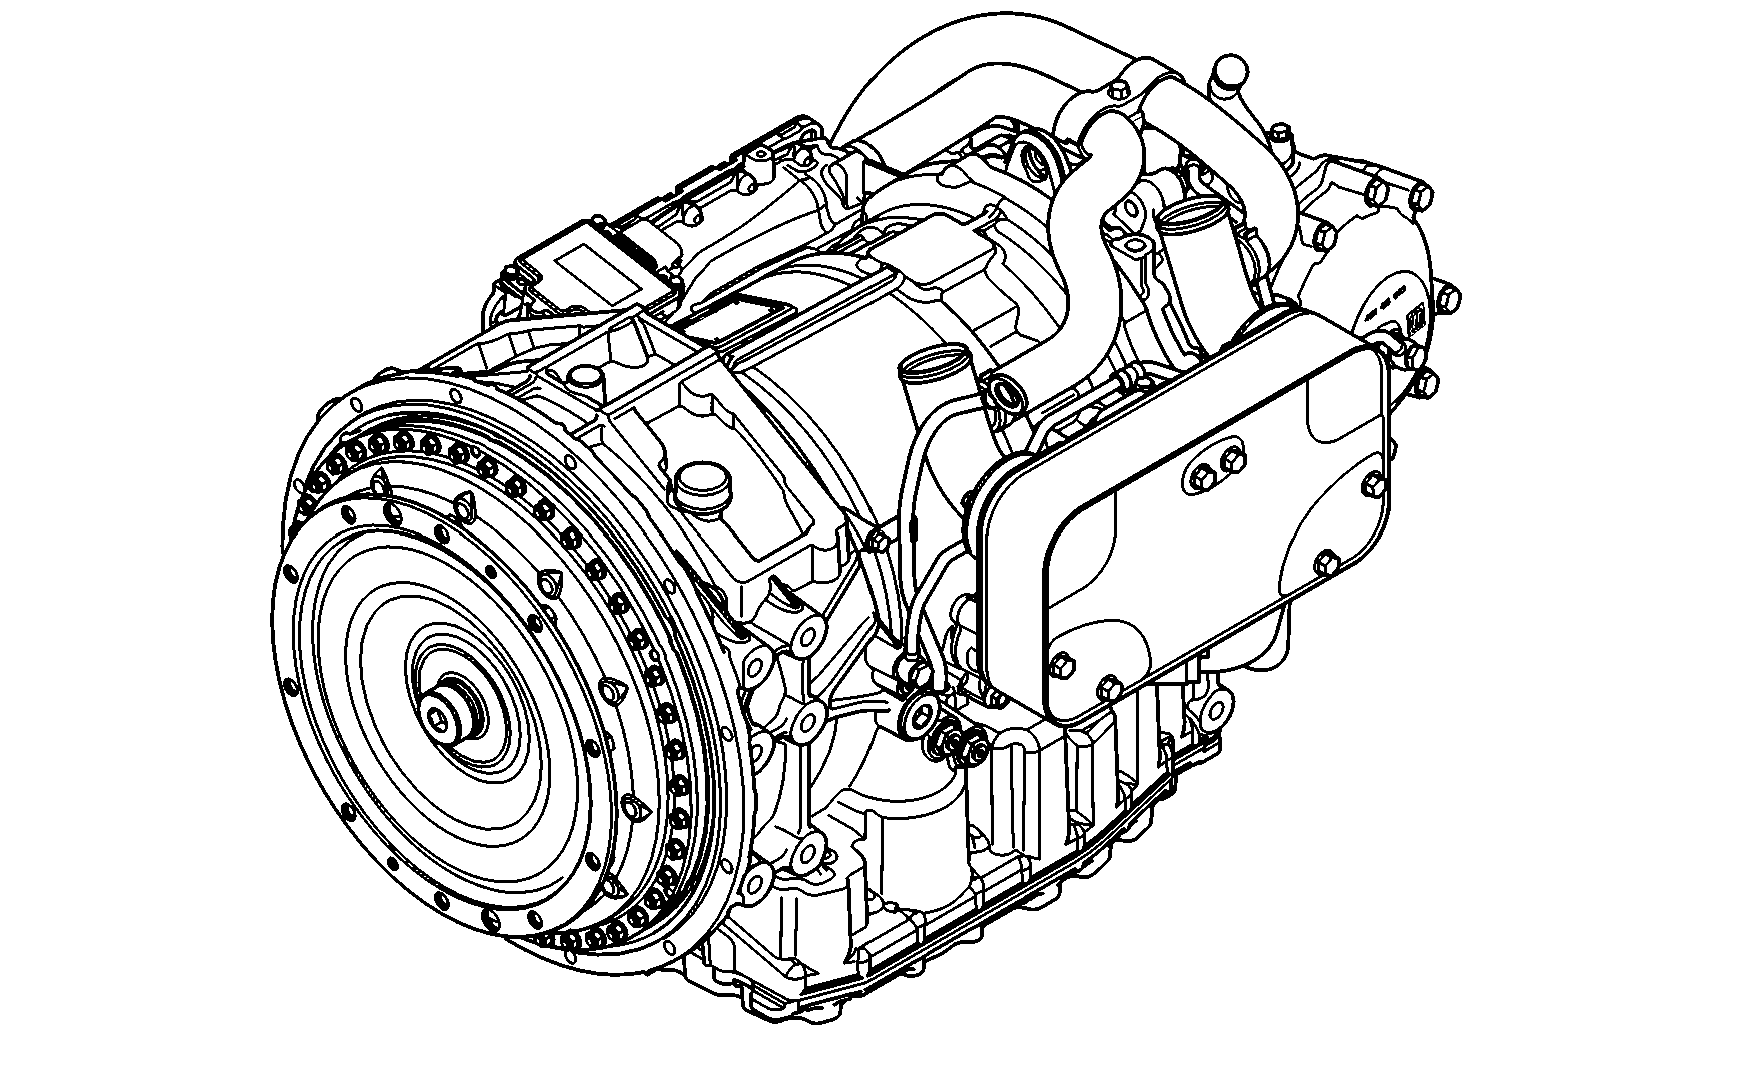 drawing for DENNIS SPECIAL VEHICLES 661874 - 6 AP 1203 B (figure 1)